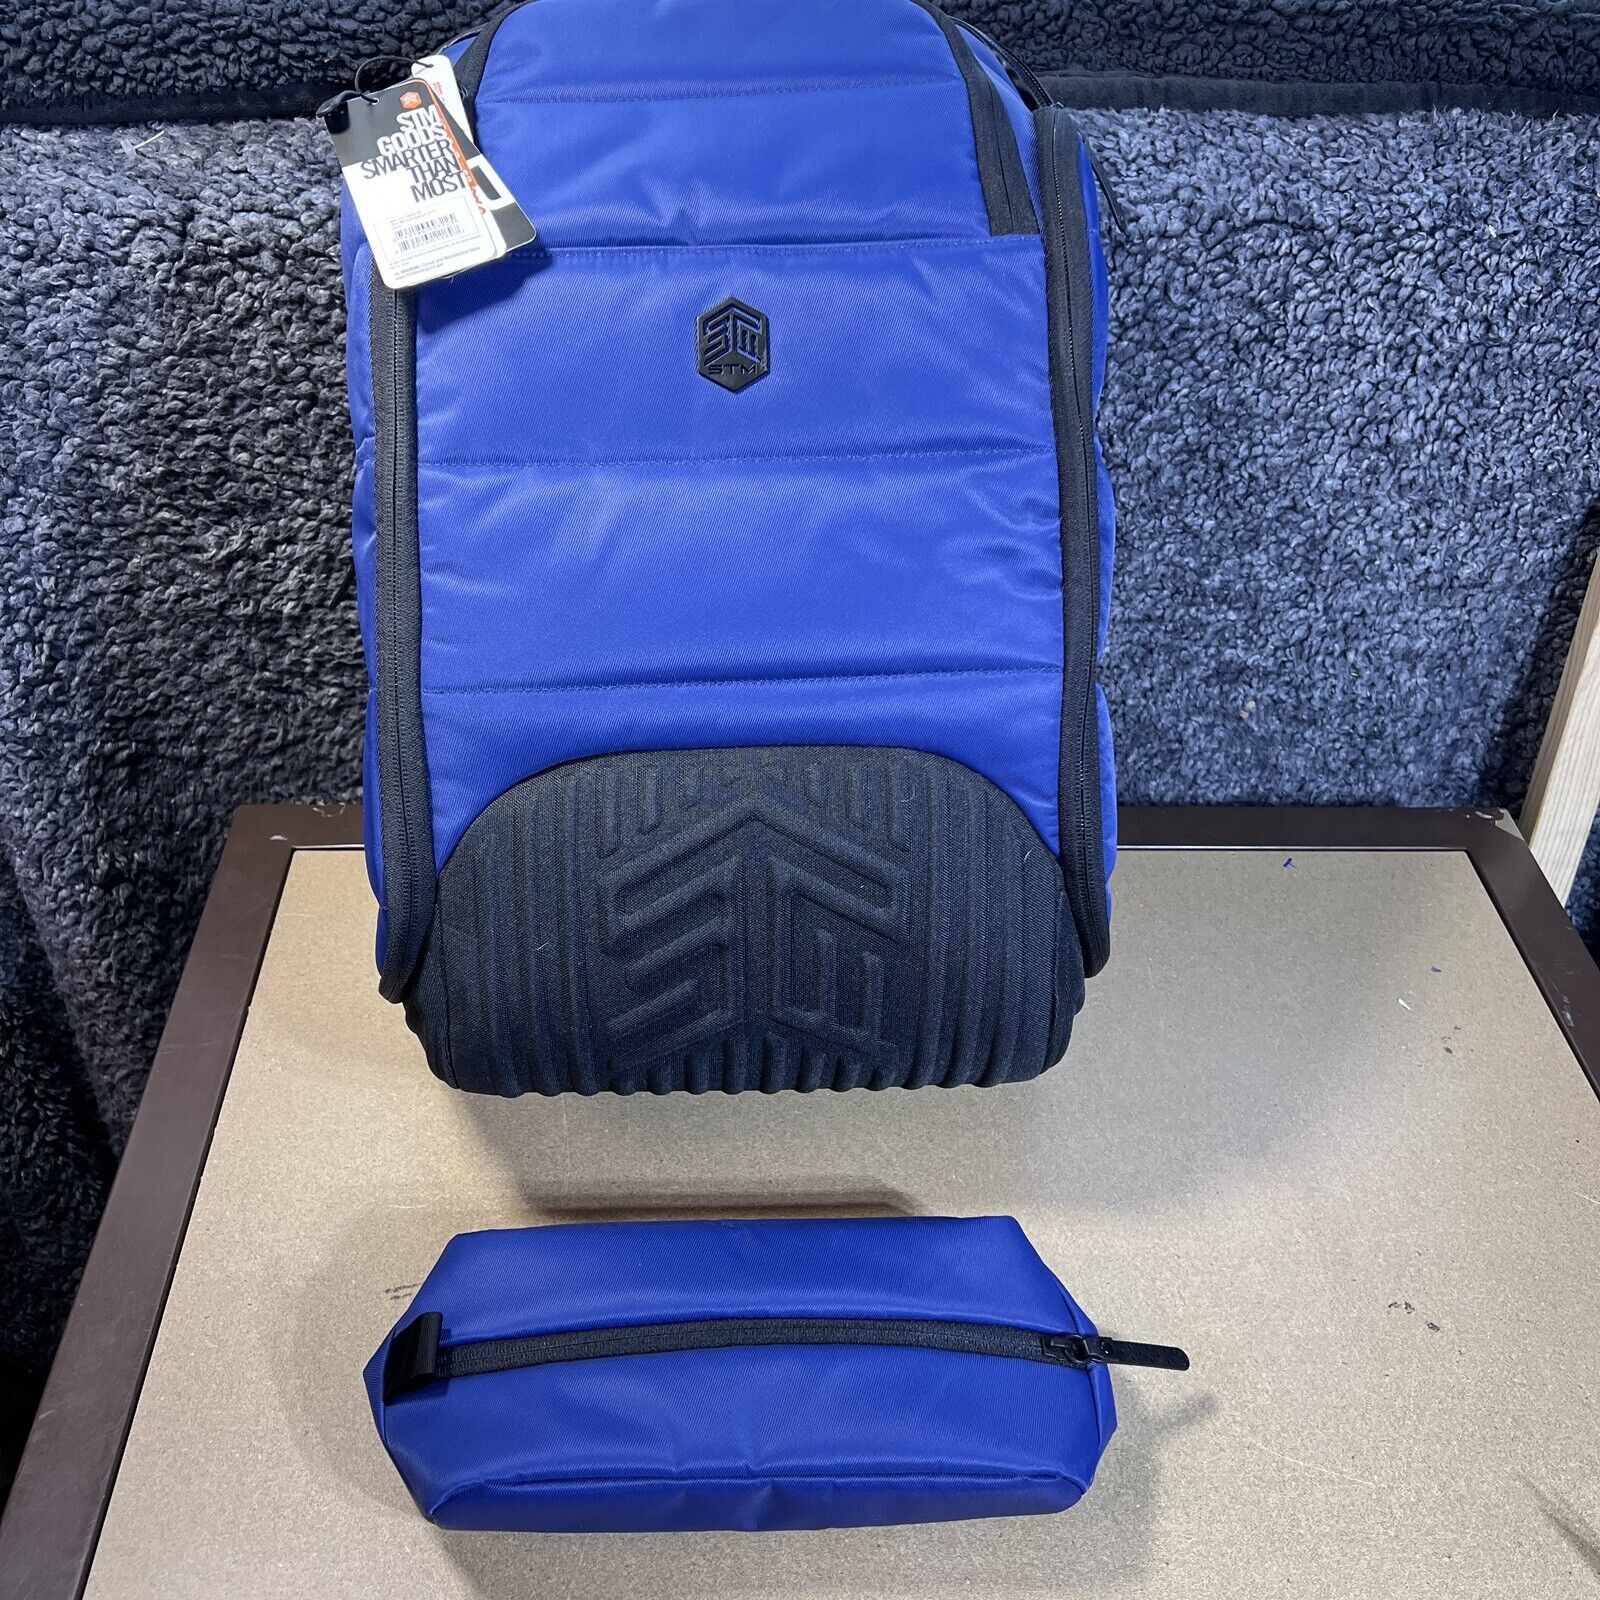 STM Goods Blue Dux backpack 30L Laptop/iPad/Camera Gear Carrying Case NWT